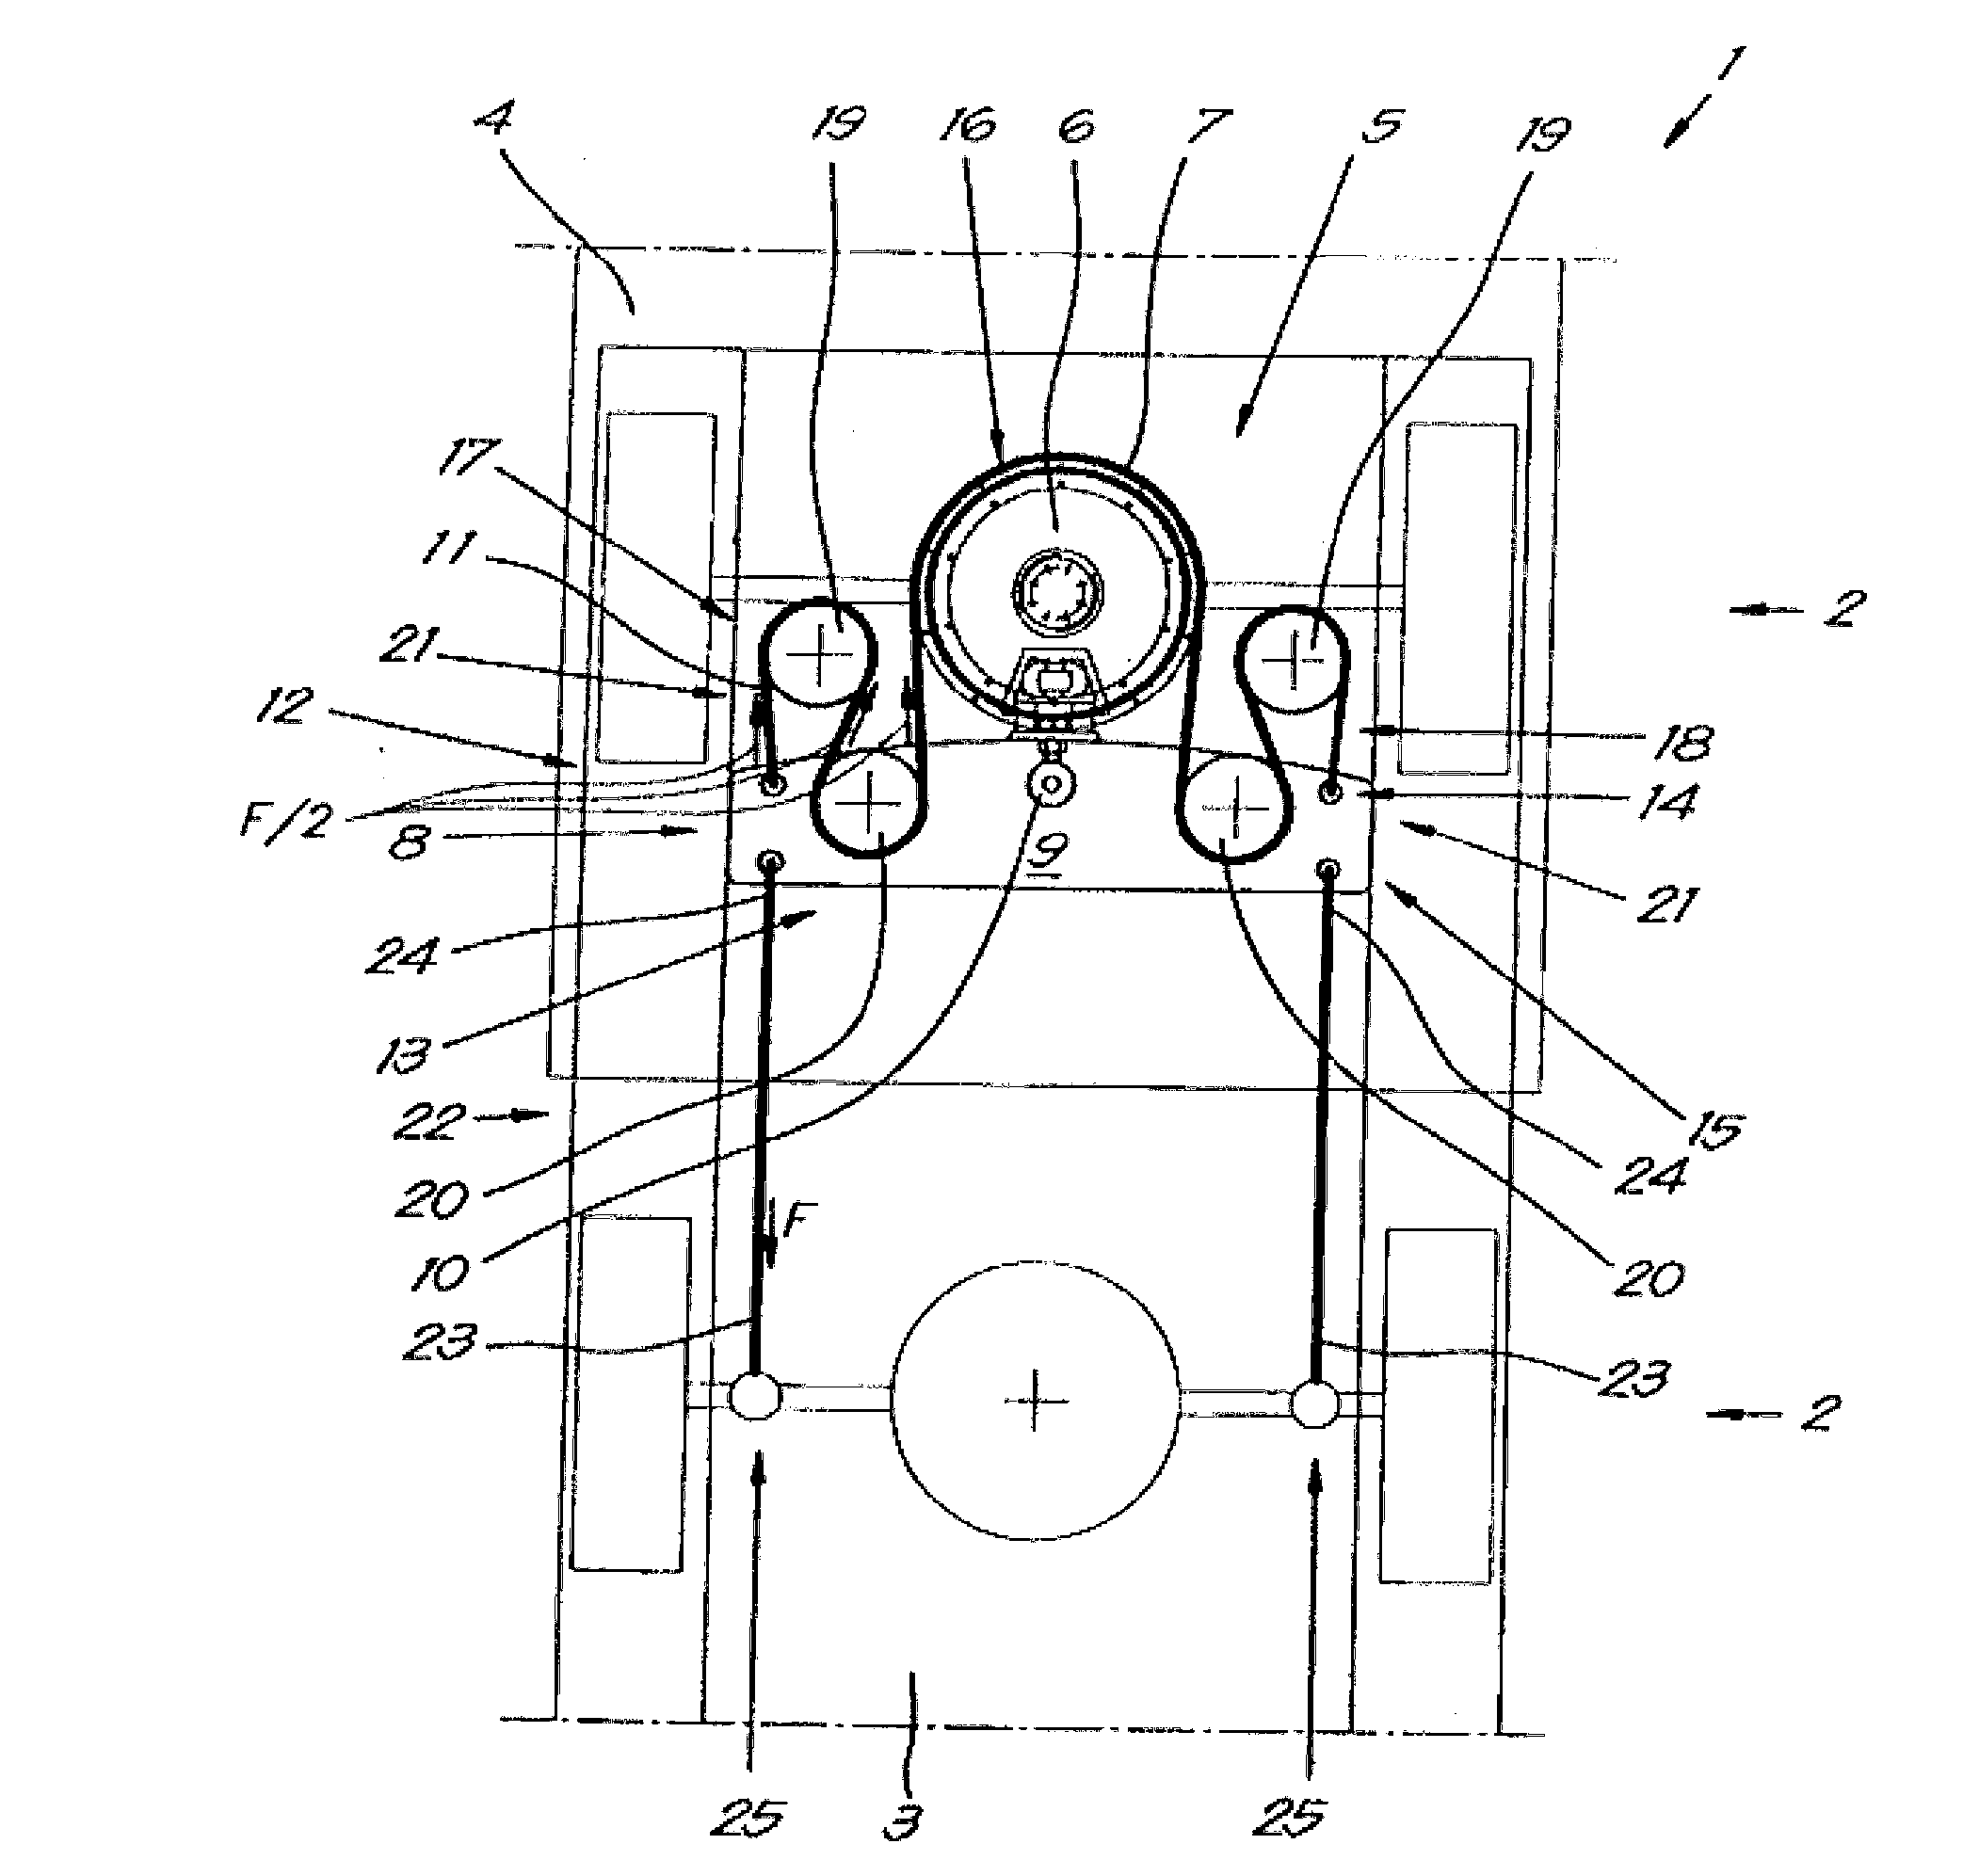 A steering mechanism for a drawn vehicle to steer one or more turnable steered axles